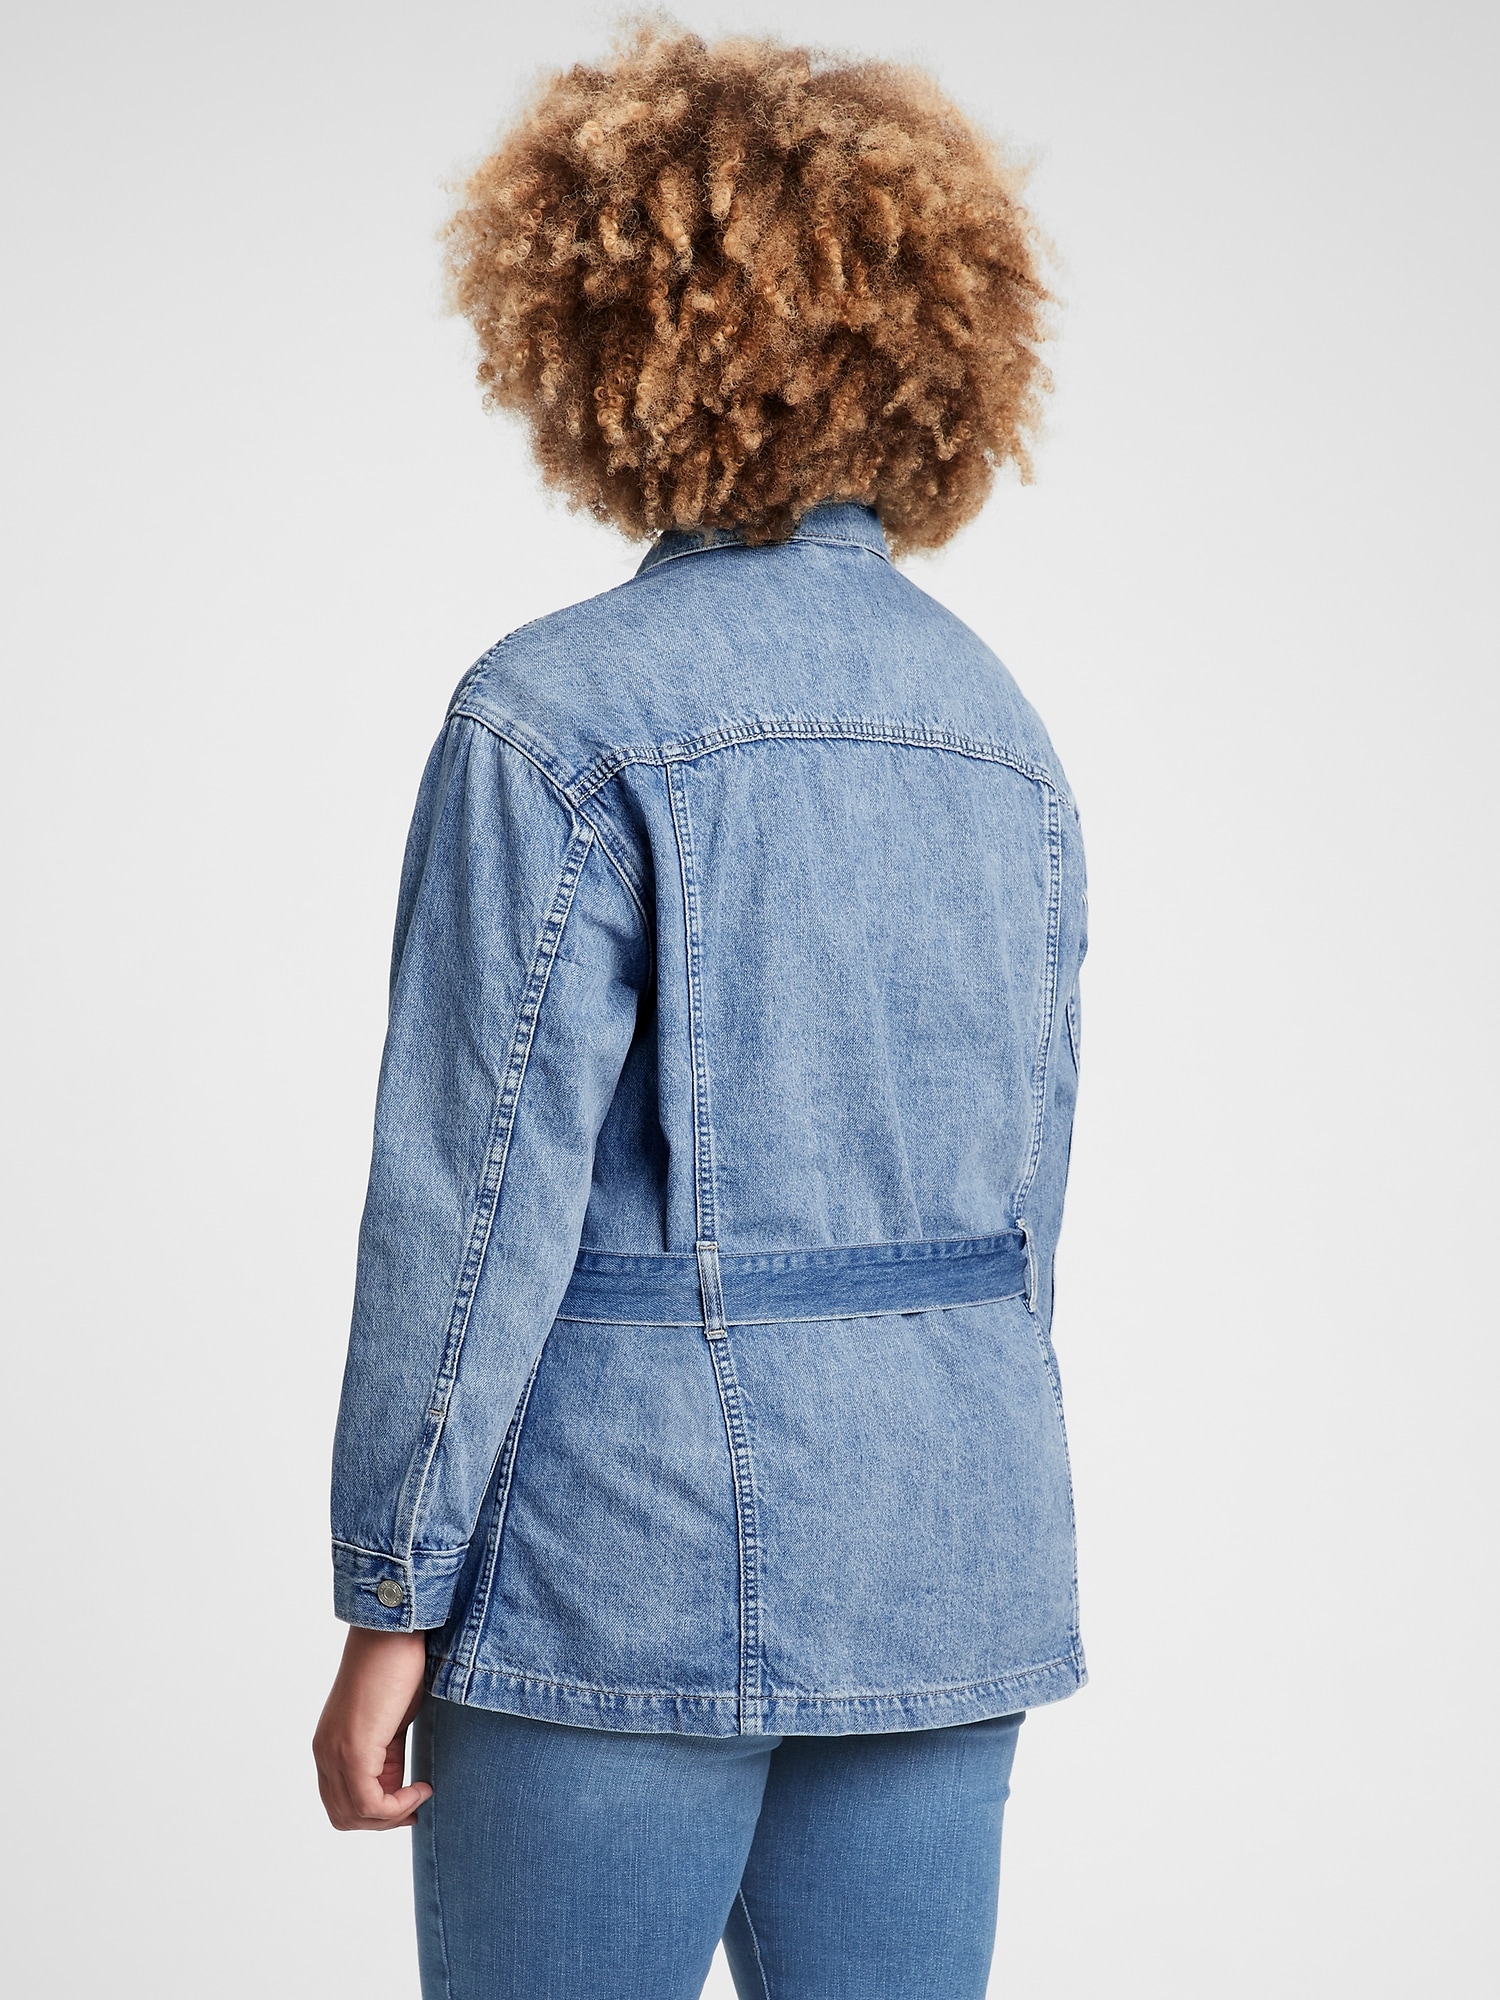 Belted Denim Jacket with Washwell | Gap Factory